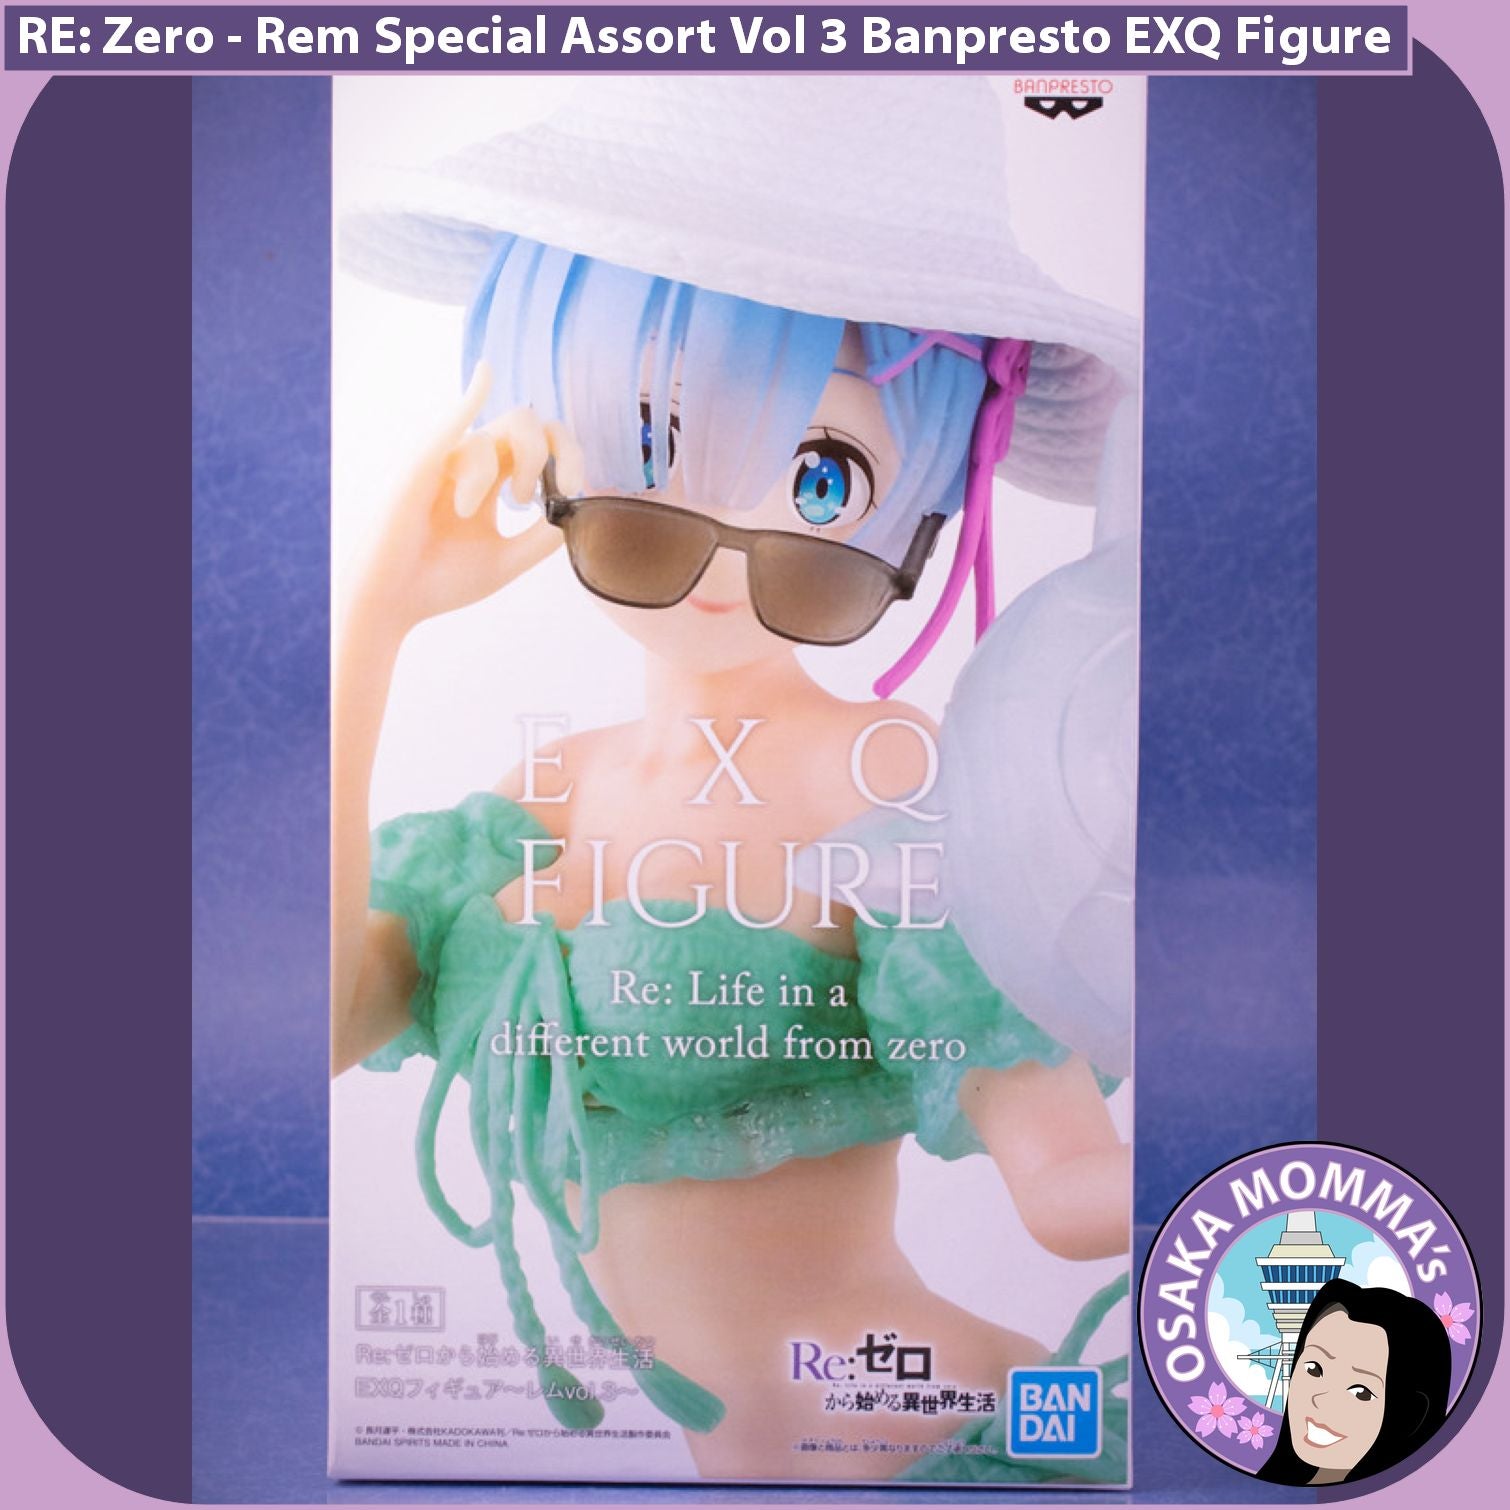 Re:ZERO -Starting Life in Another World-, Vol. 11 (light novel) (Re:ZERO  -Starting Life in Another World-, 11)